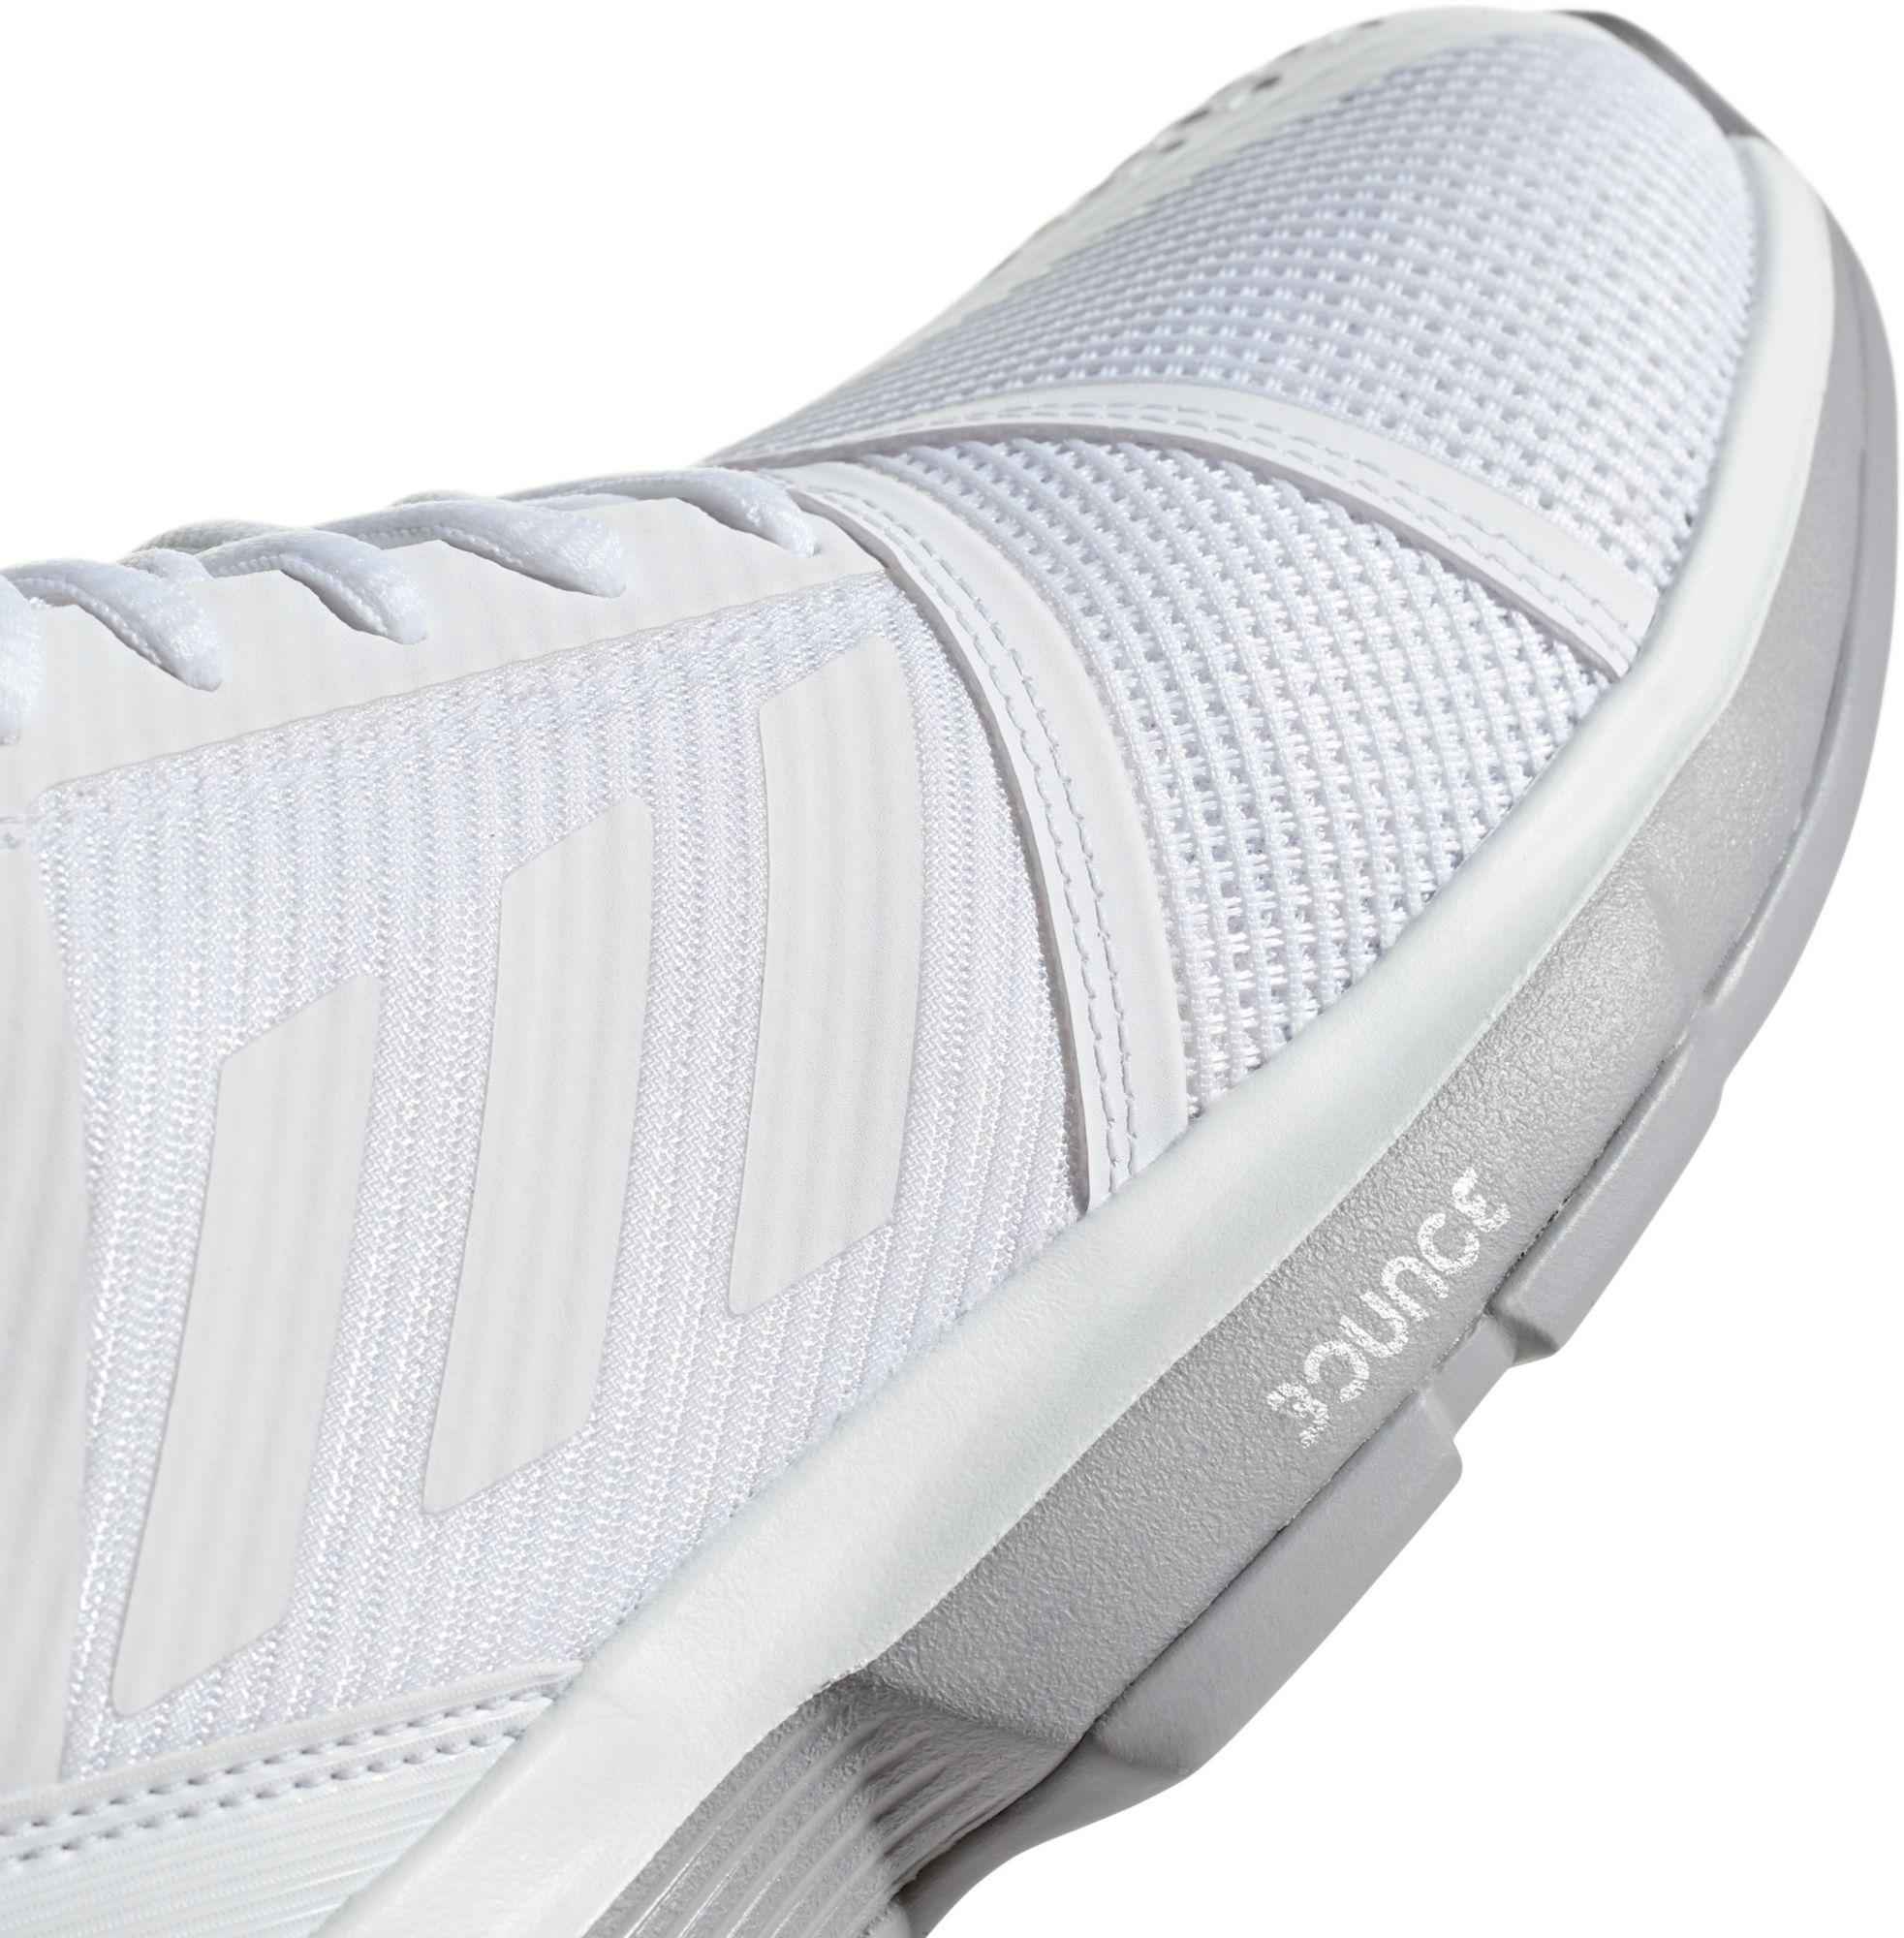 adidas Court Jam Tennis Shoes in White - Lyst